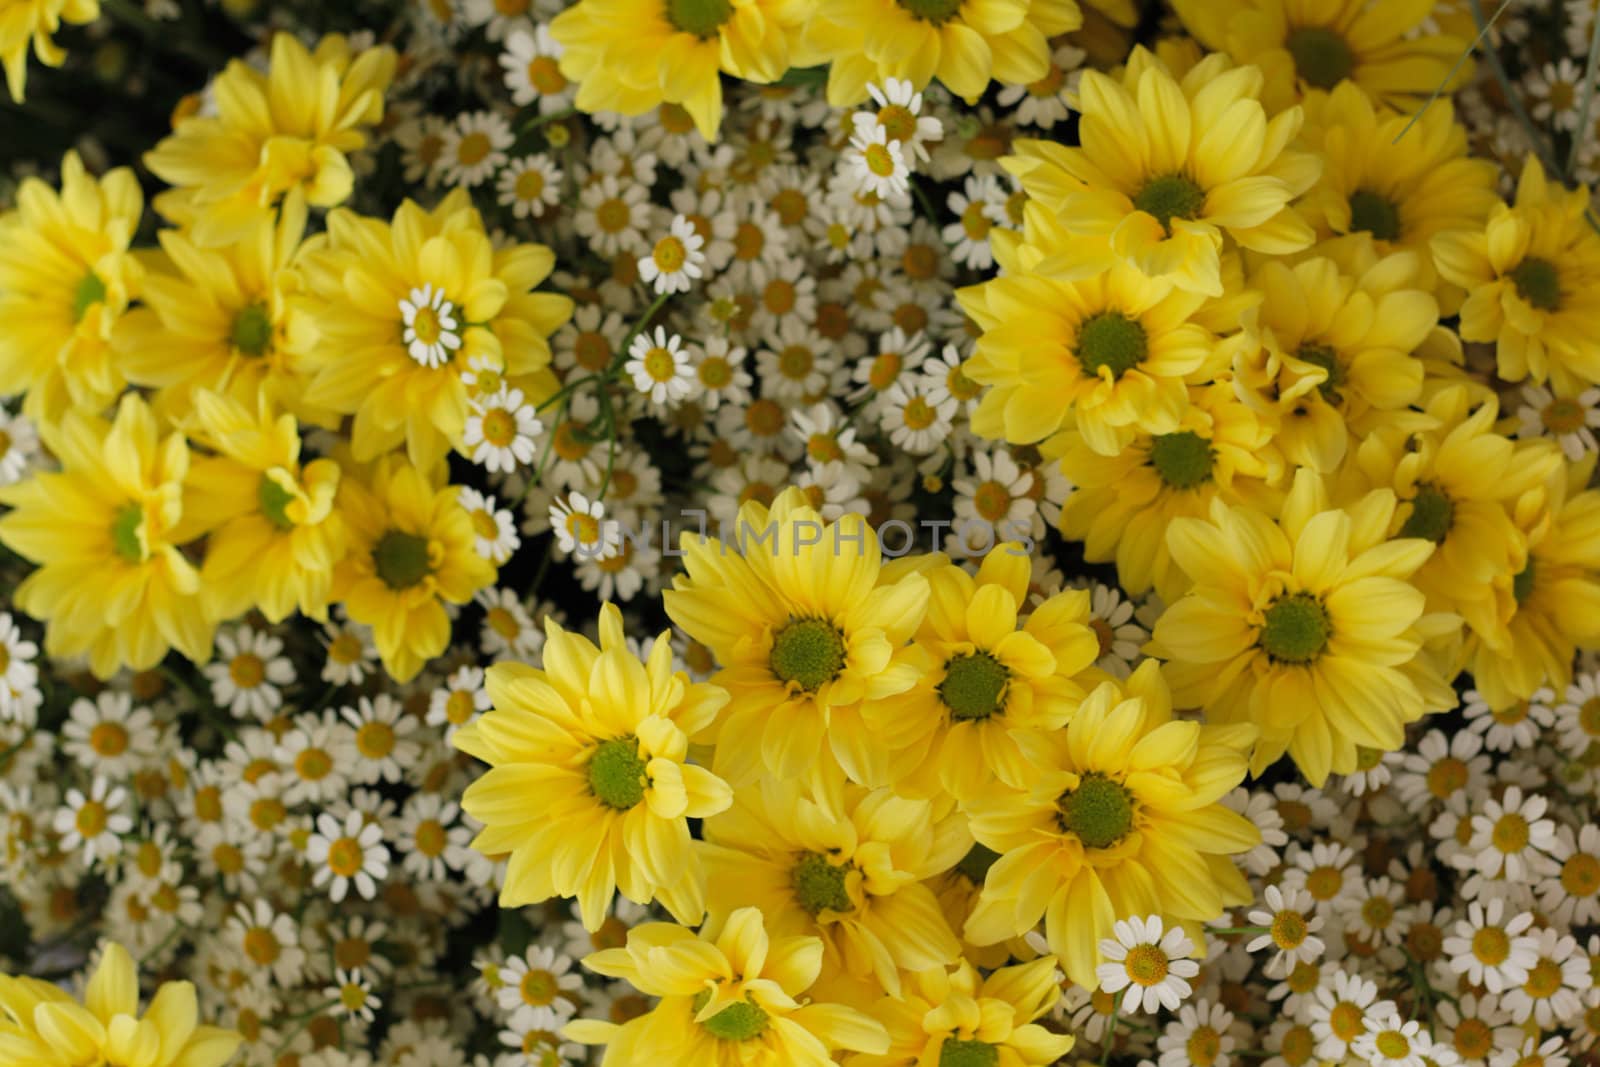 yellow flowers as nice natural spring background